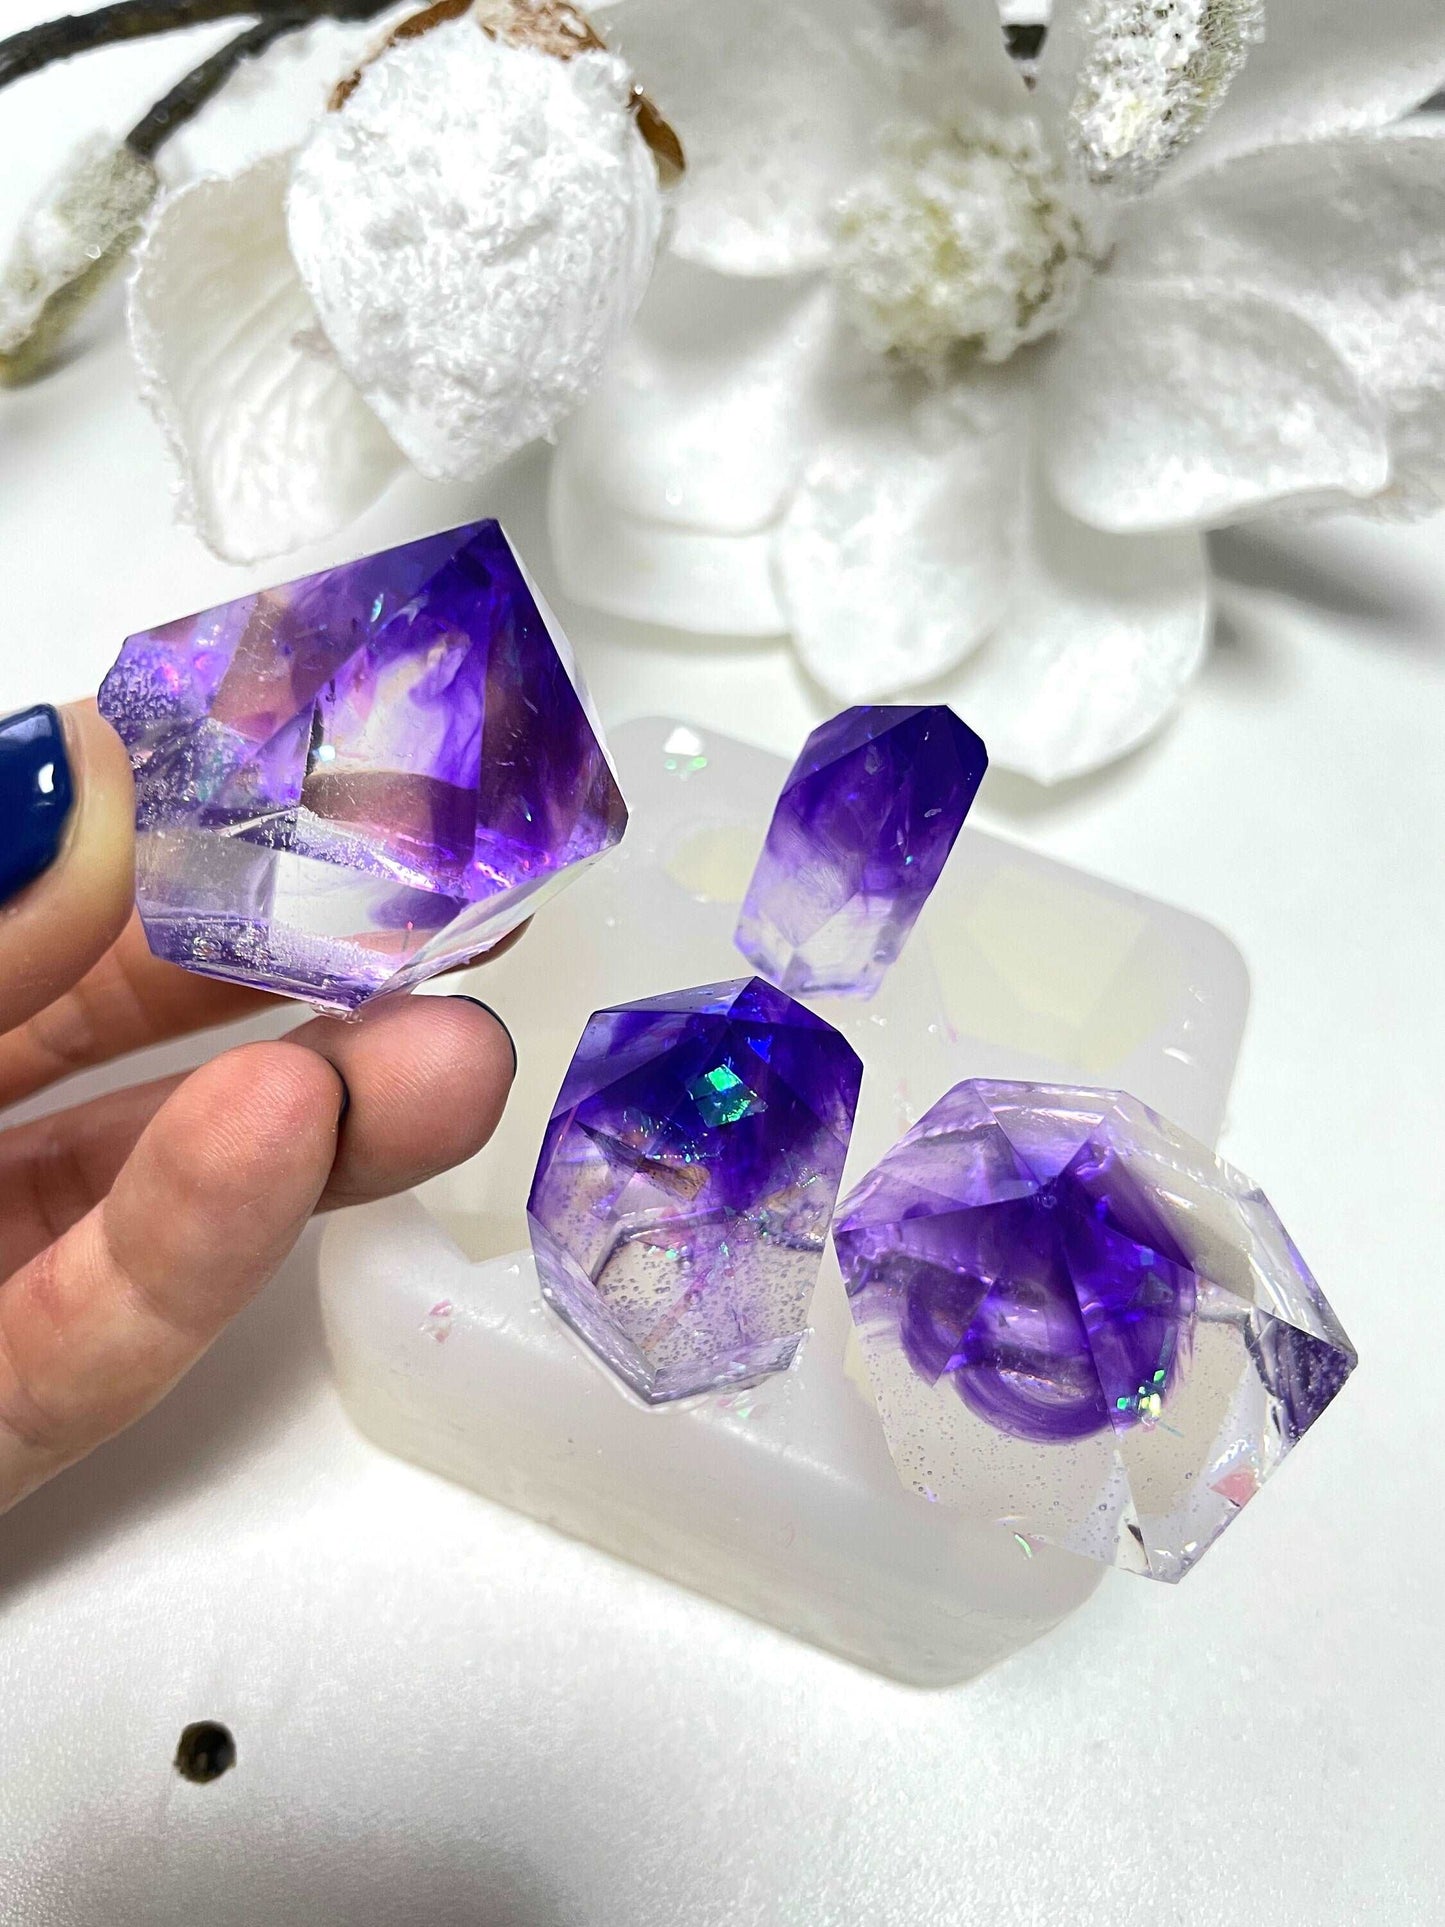 4 Large Amethyst Crystals Silicone mold. Stone mold art stone mold jewelry mold crystal personalized gifts handmade jewelry jewellery making